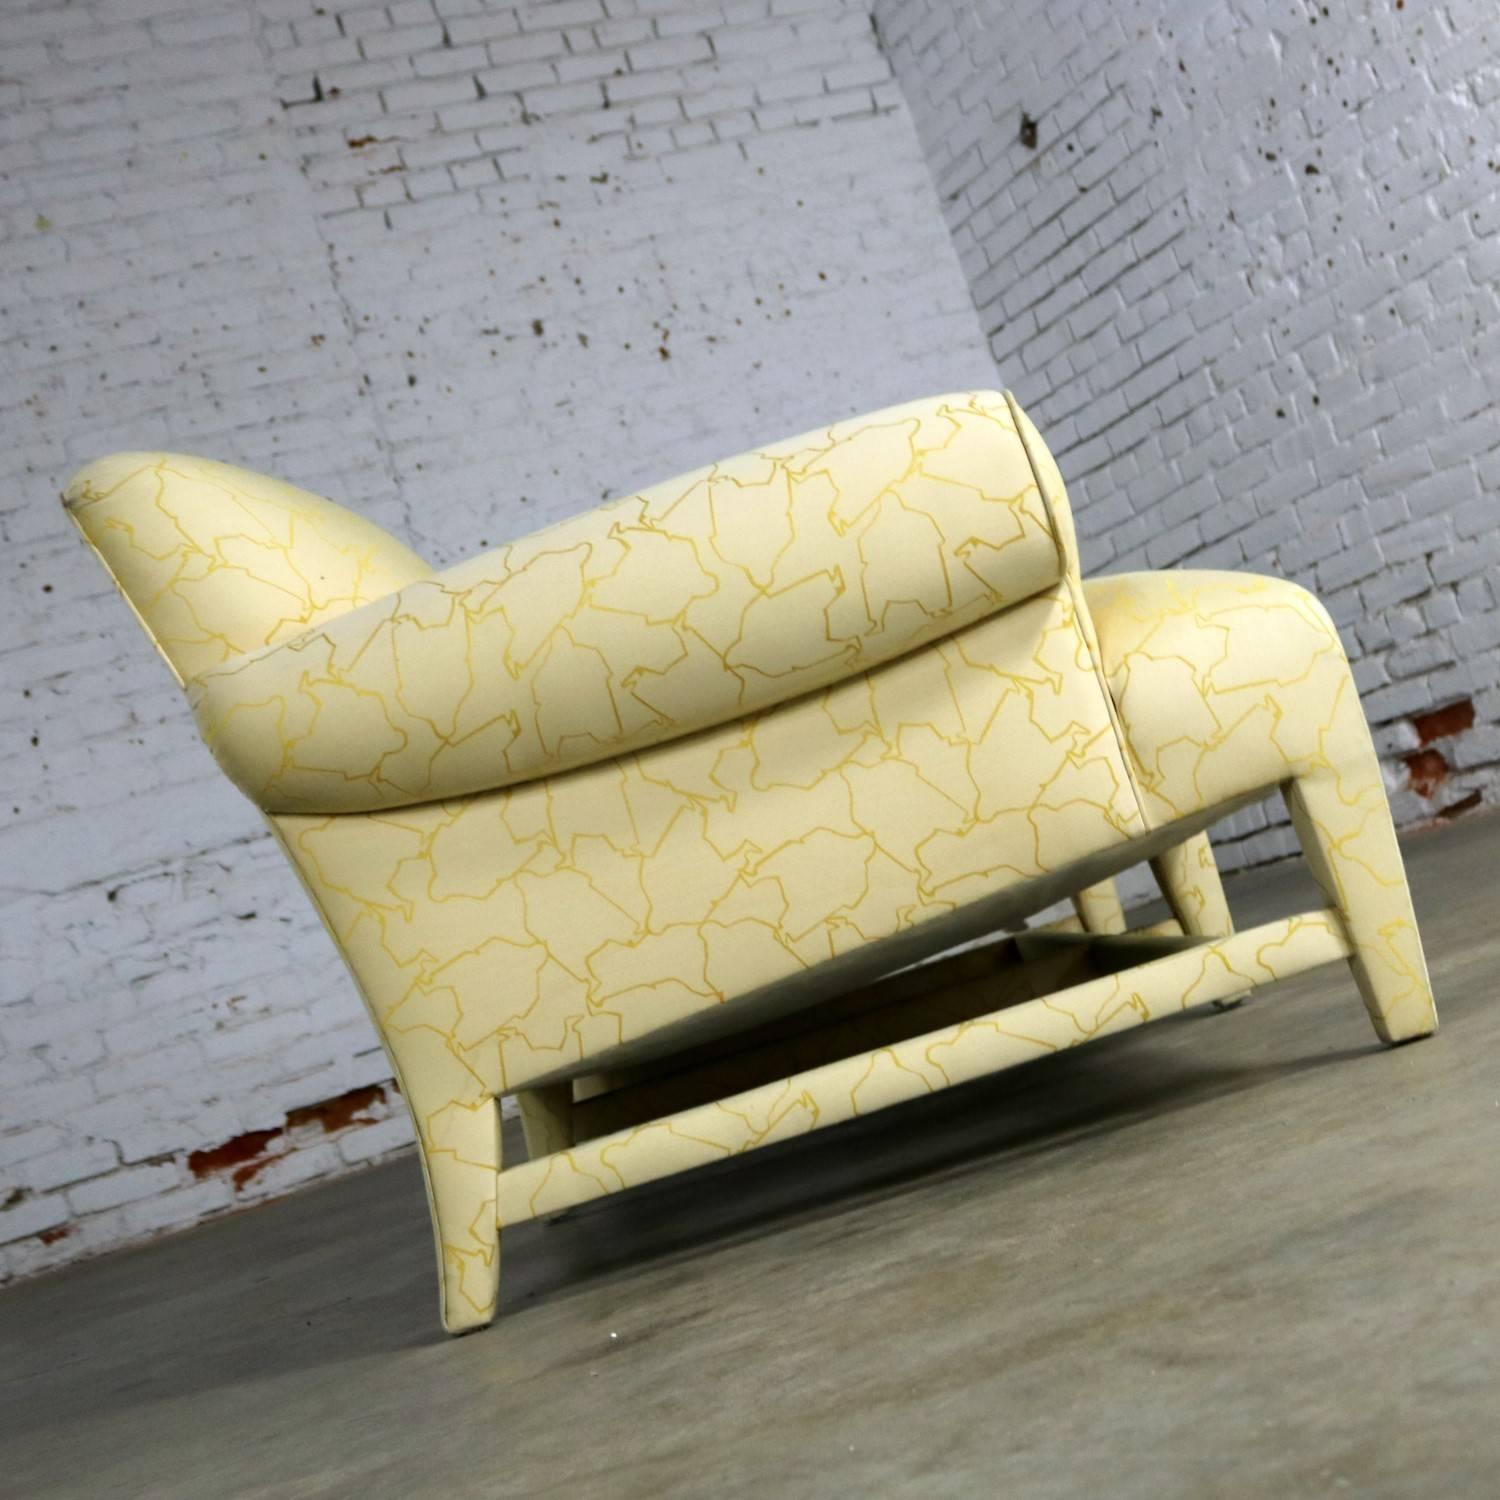 Late 20th Century Donghia Loveseat Sofa in Cream and Yellow Fat Man Fabric Attributed to Angelo D